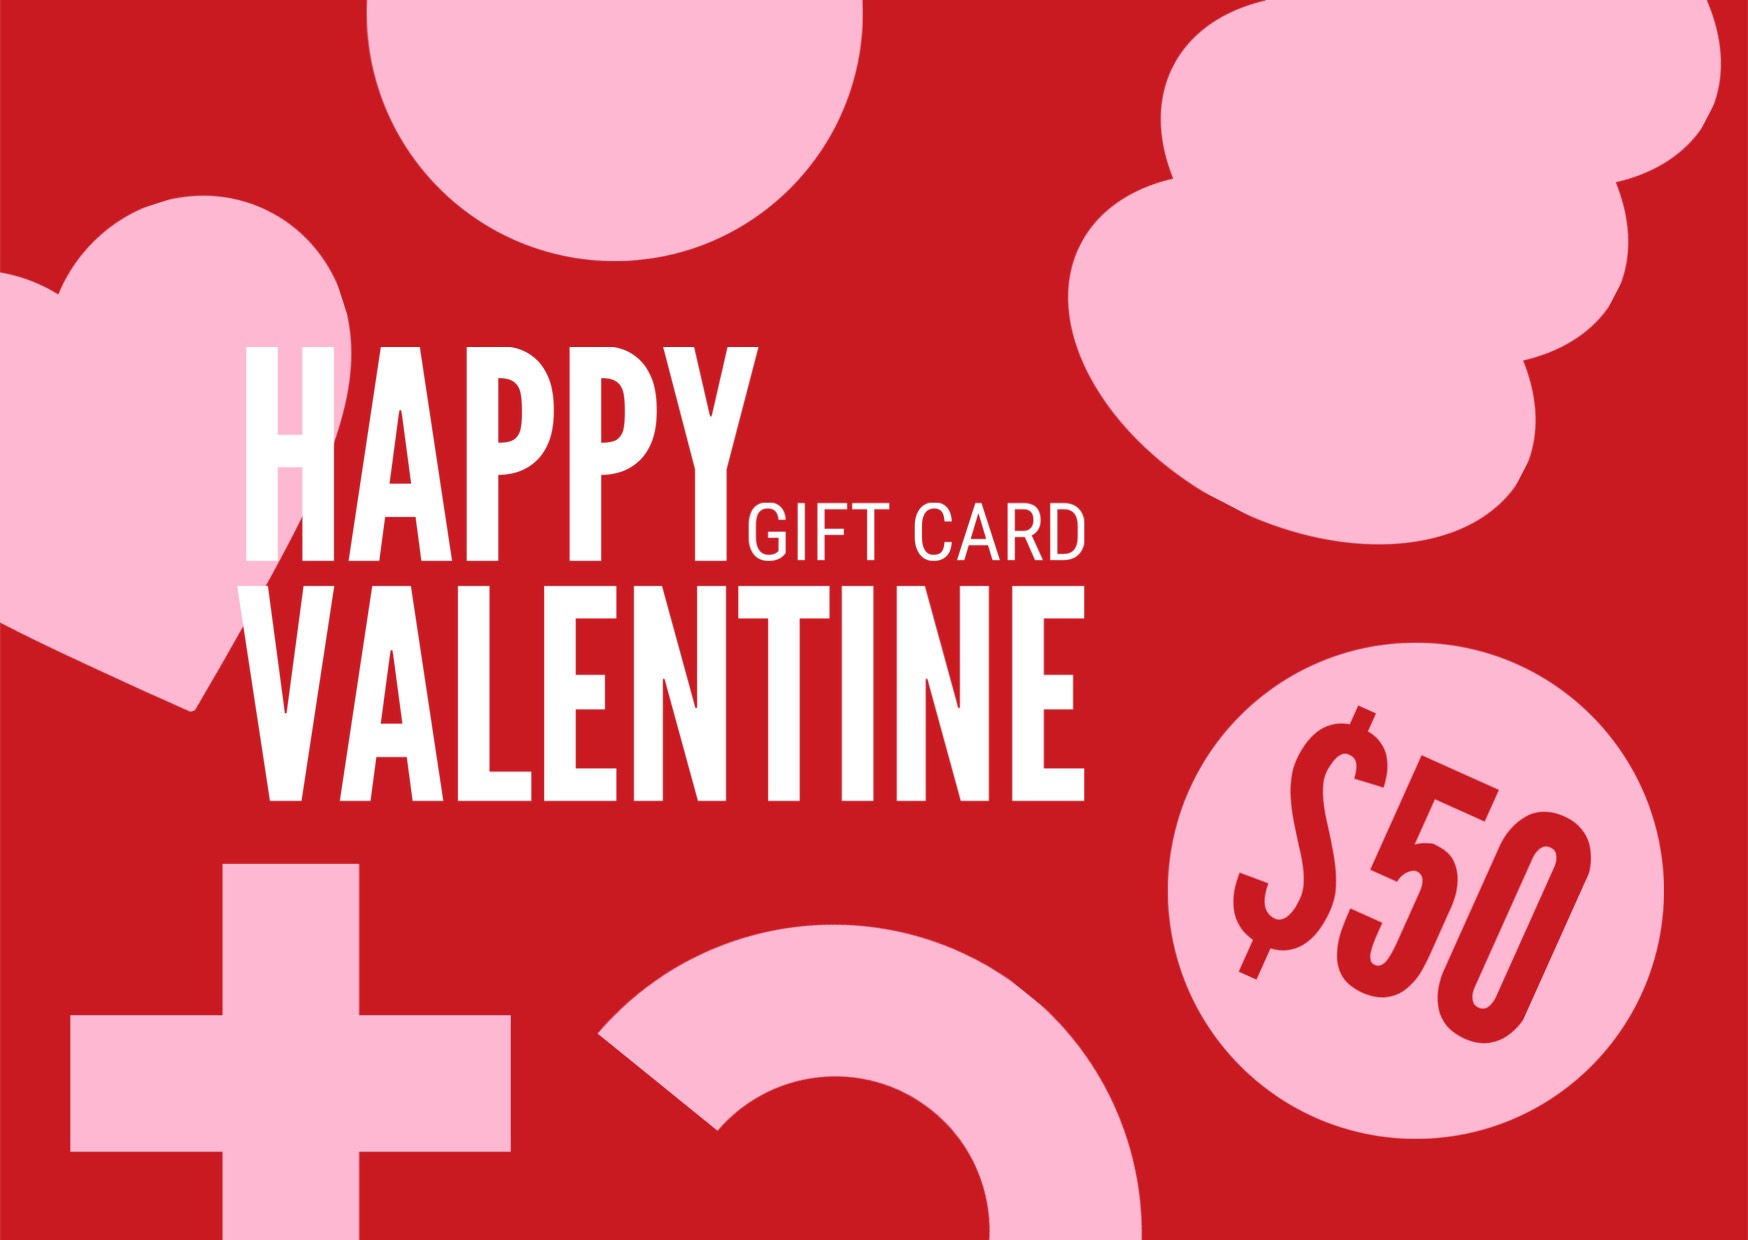 pink red valentine shapes gift card voucher template